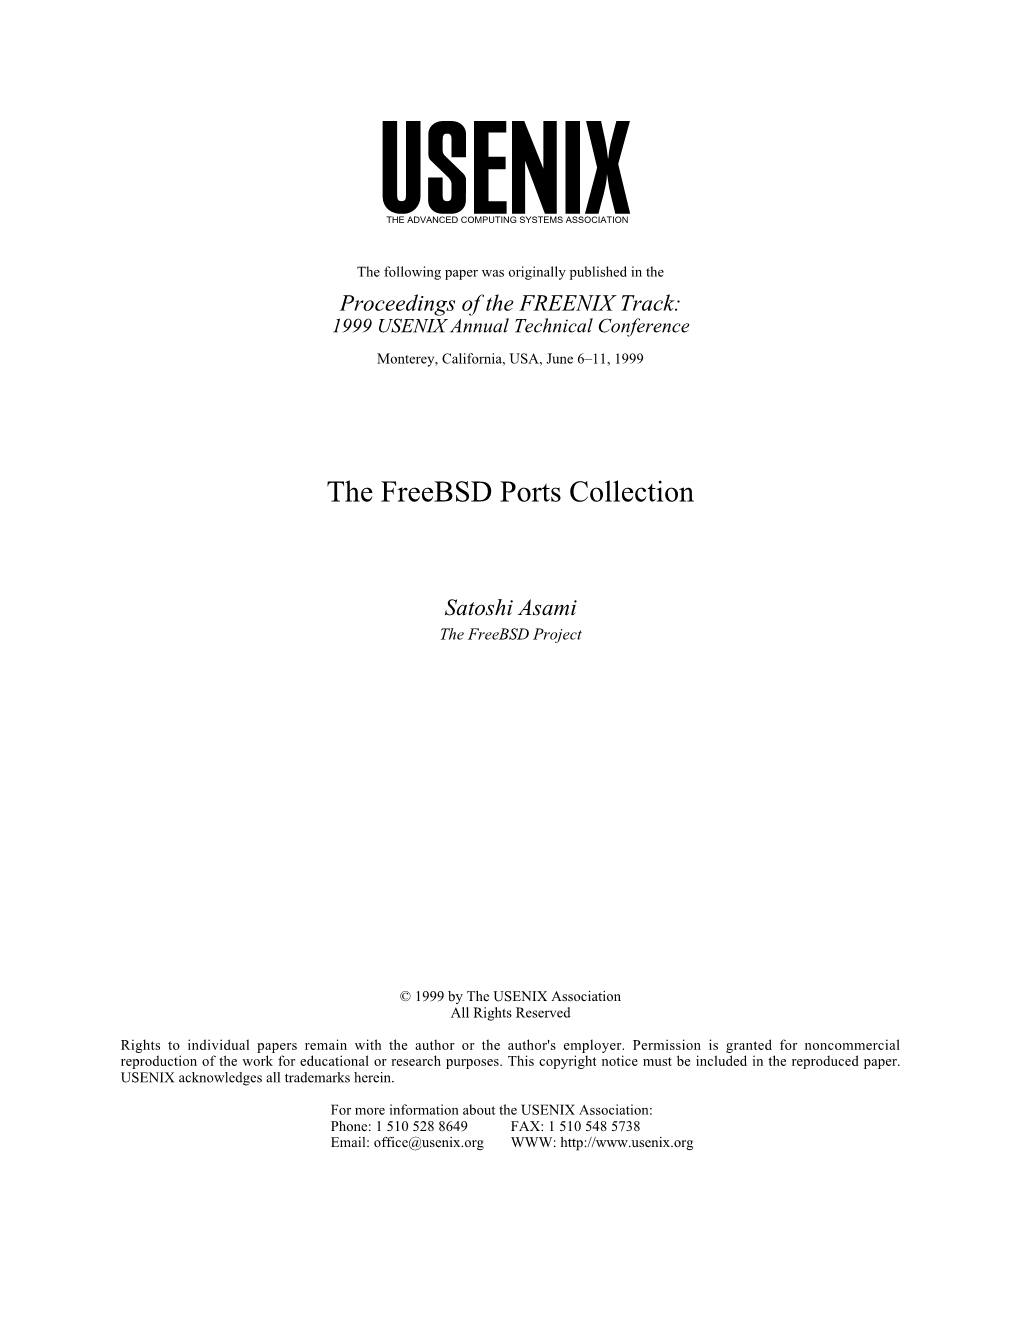 The Freebsd Ports Collection